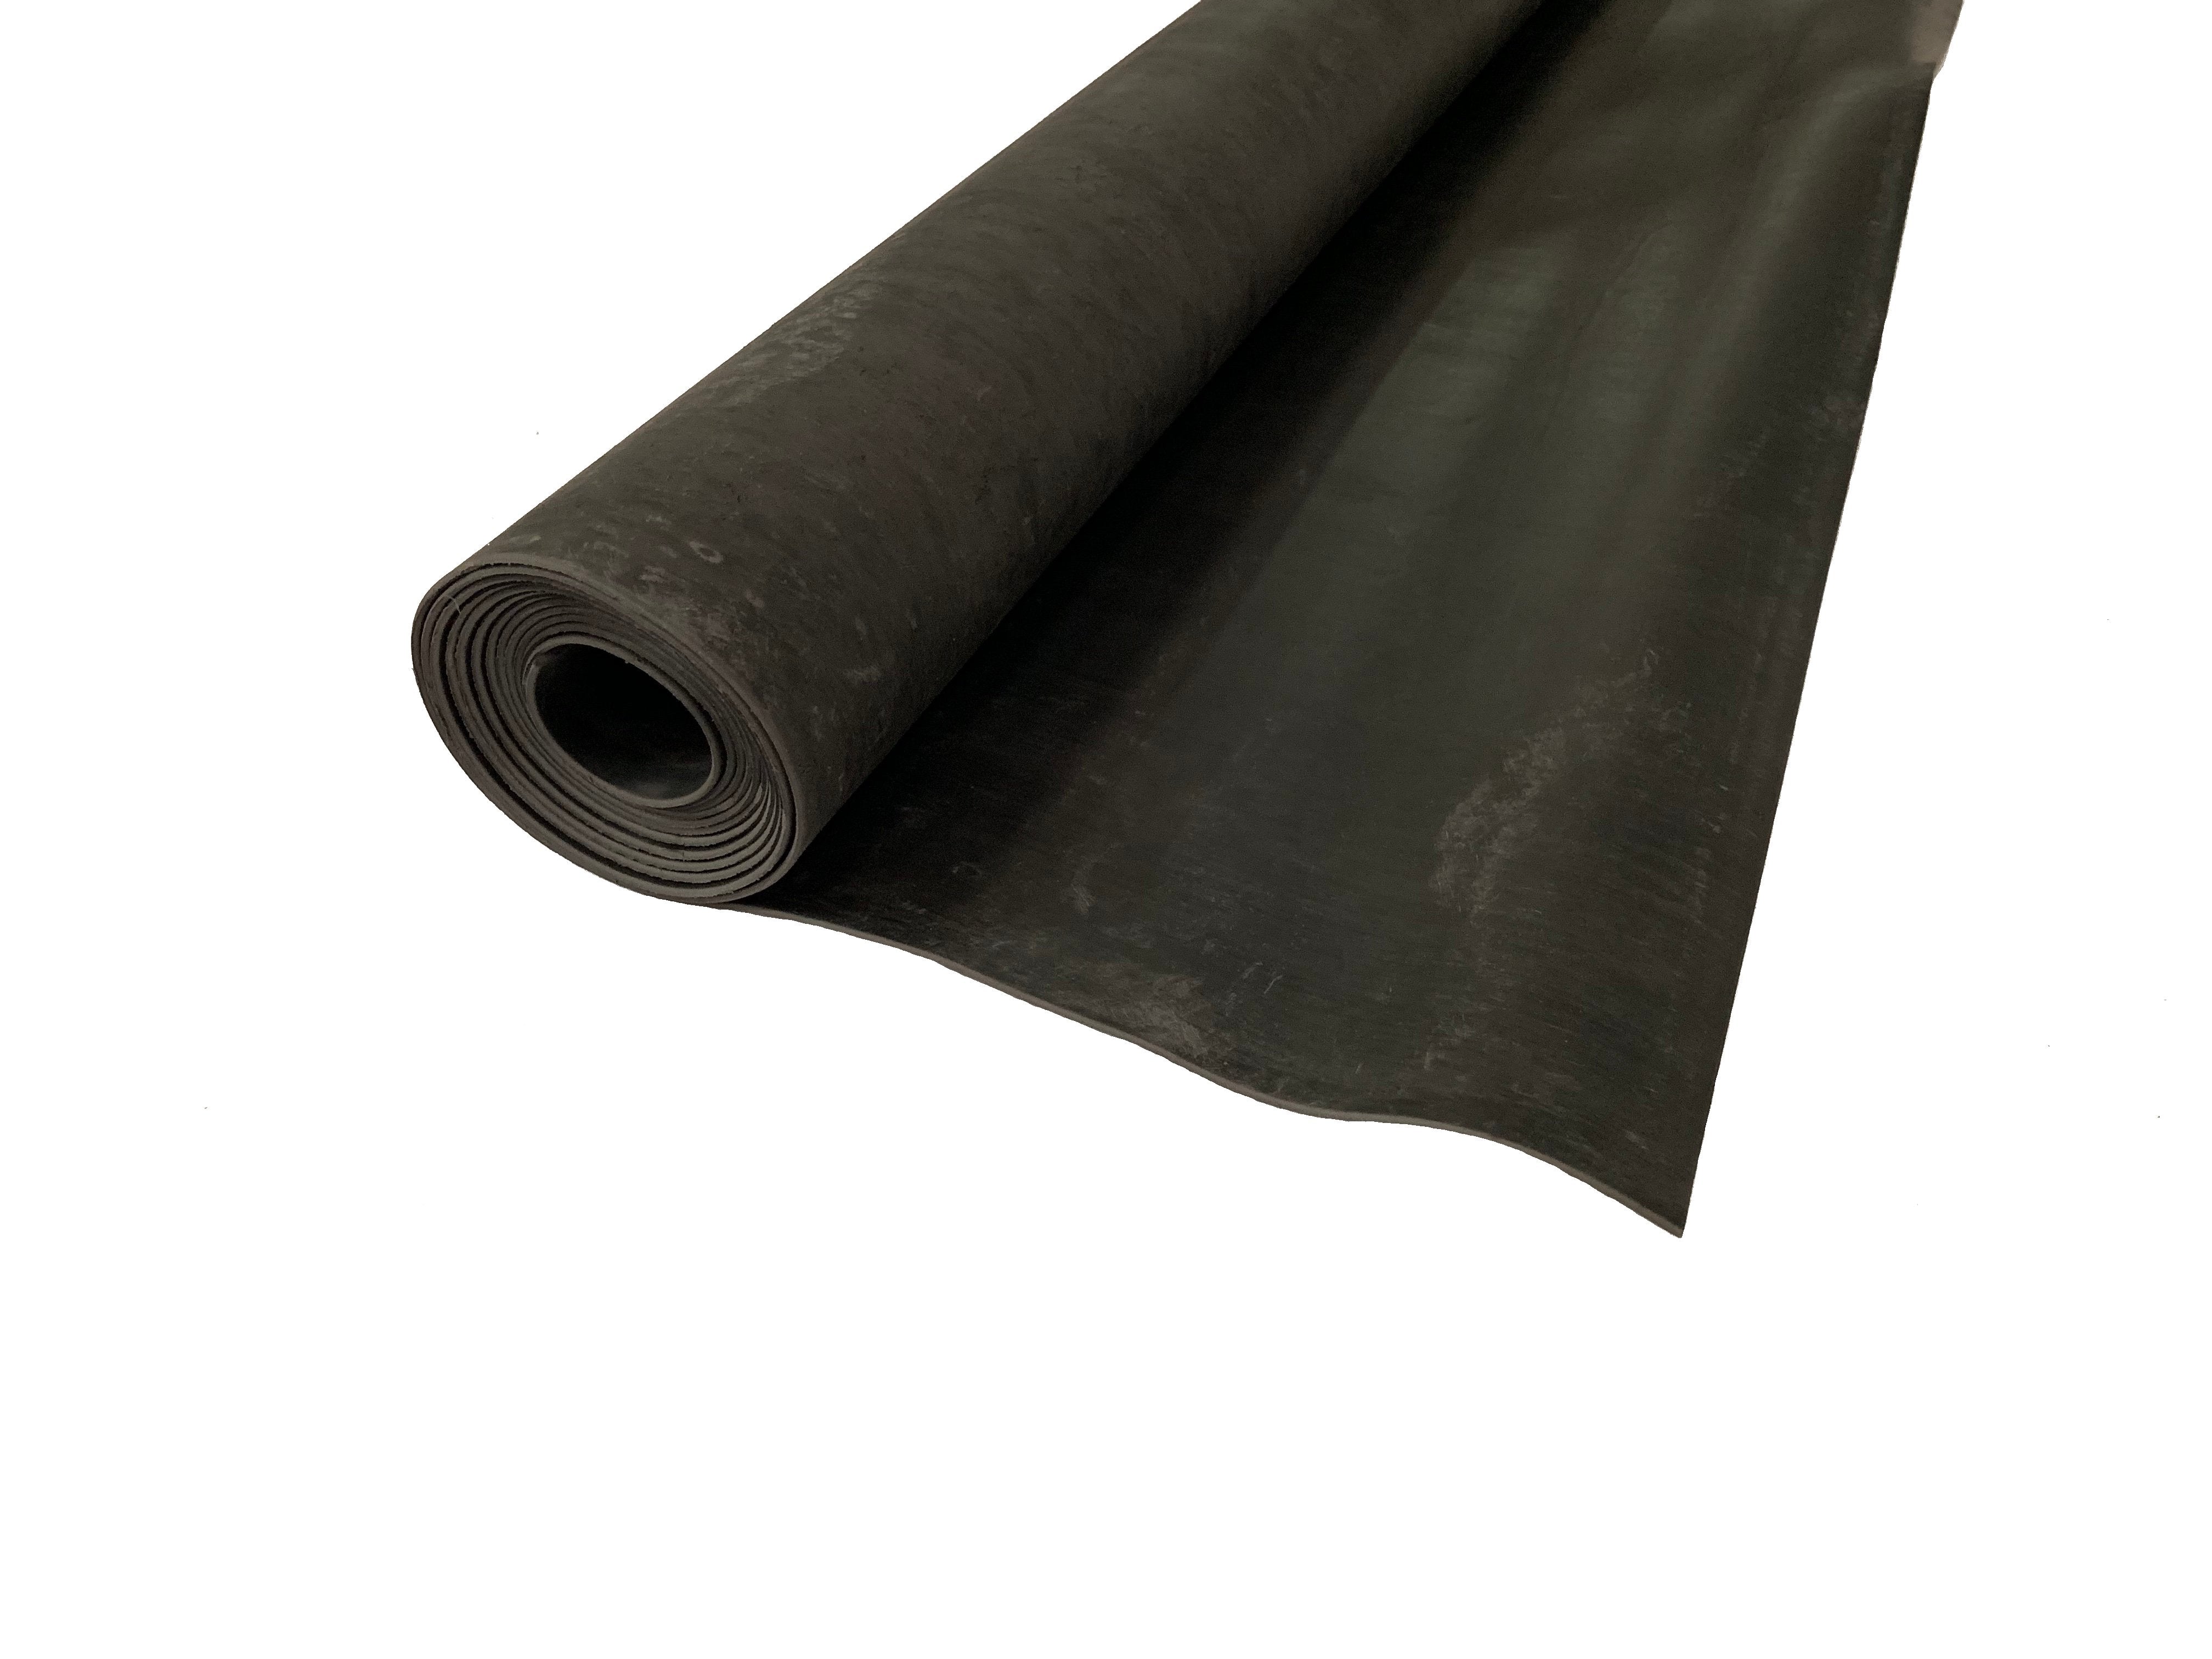 2mm 5kg Soundproofing Mat 1.25m by 3m